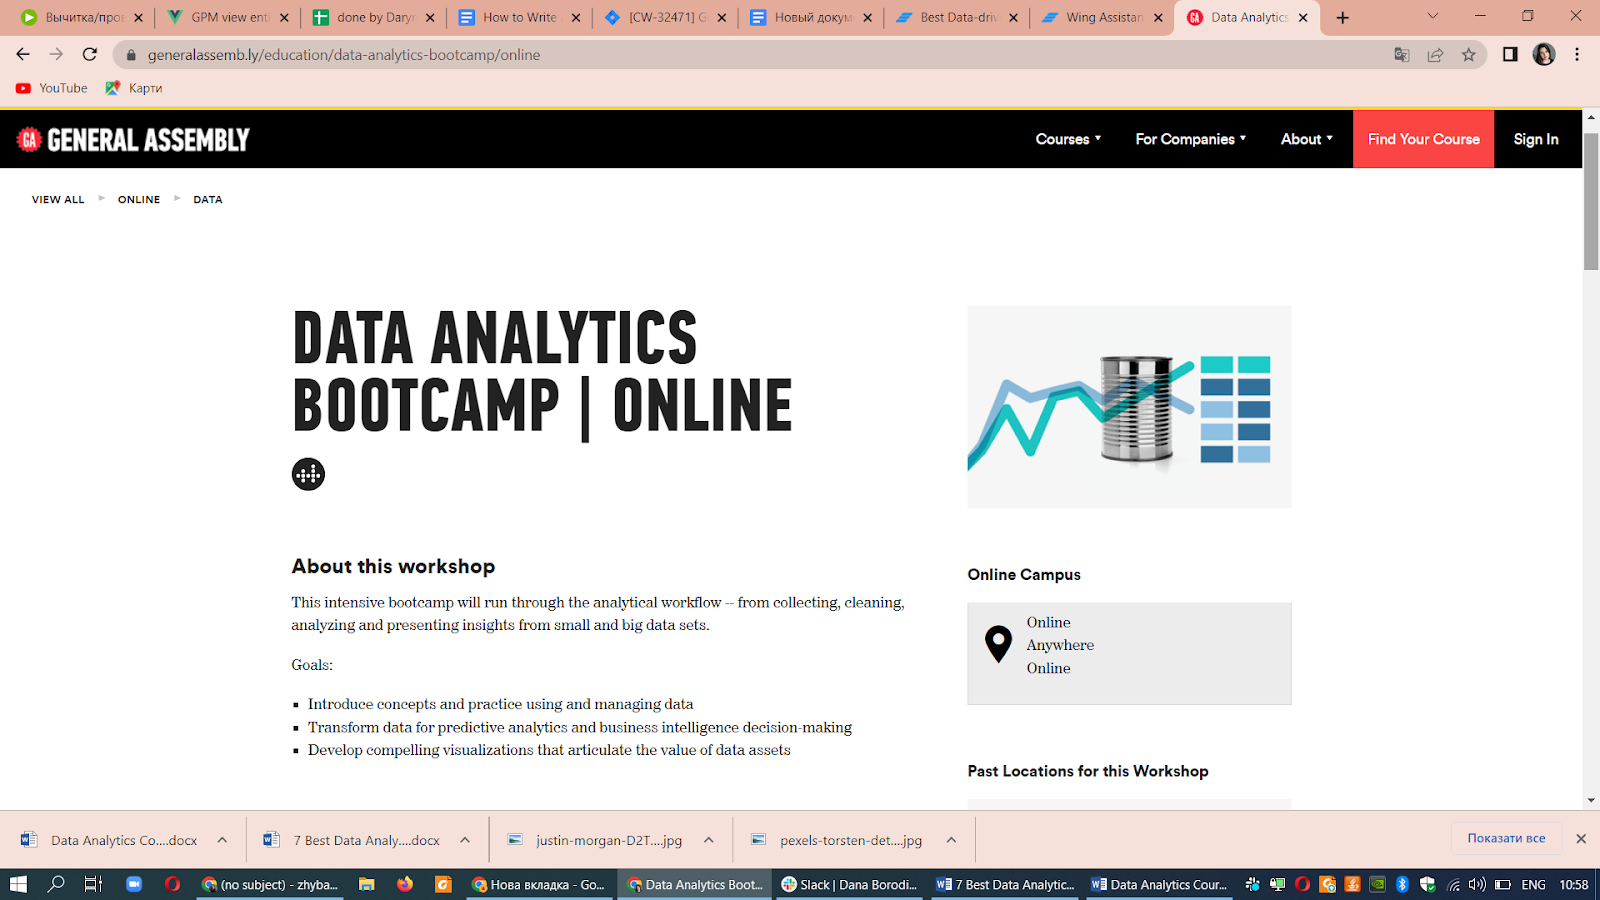 Data Analytics Bootcamp - General Assembly